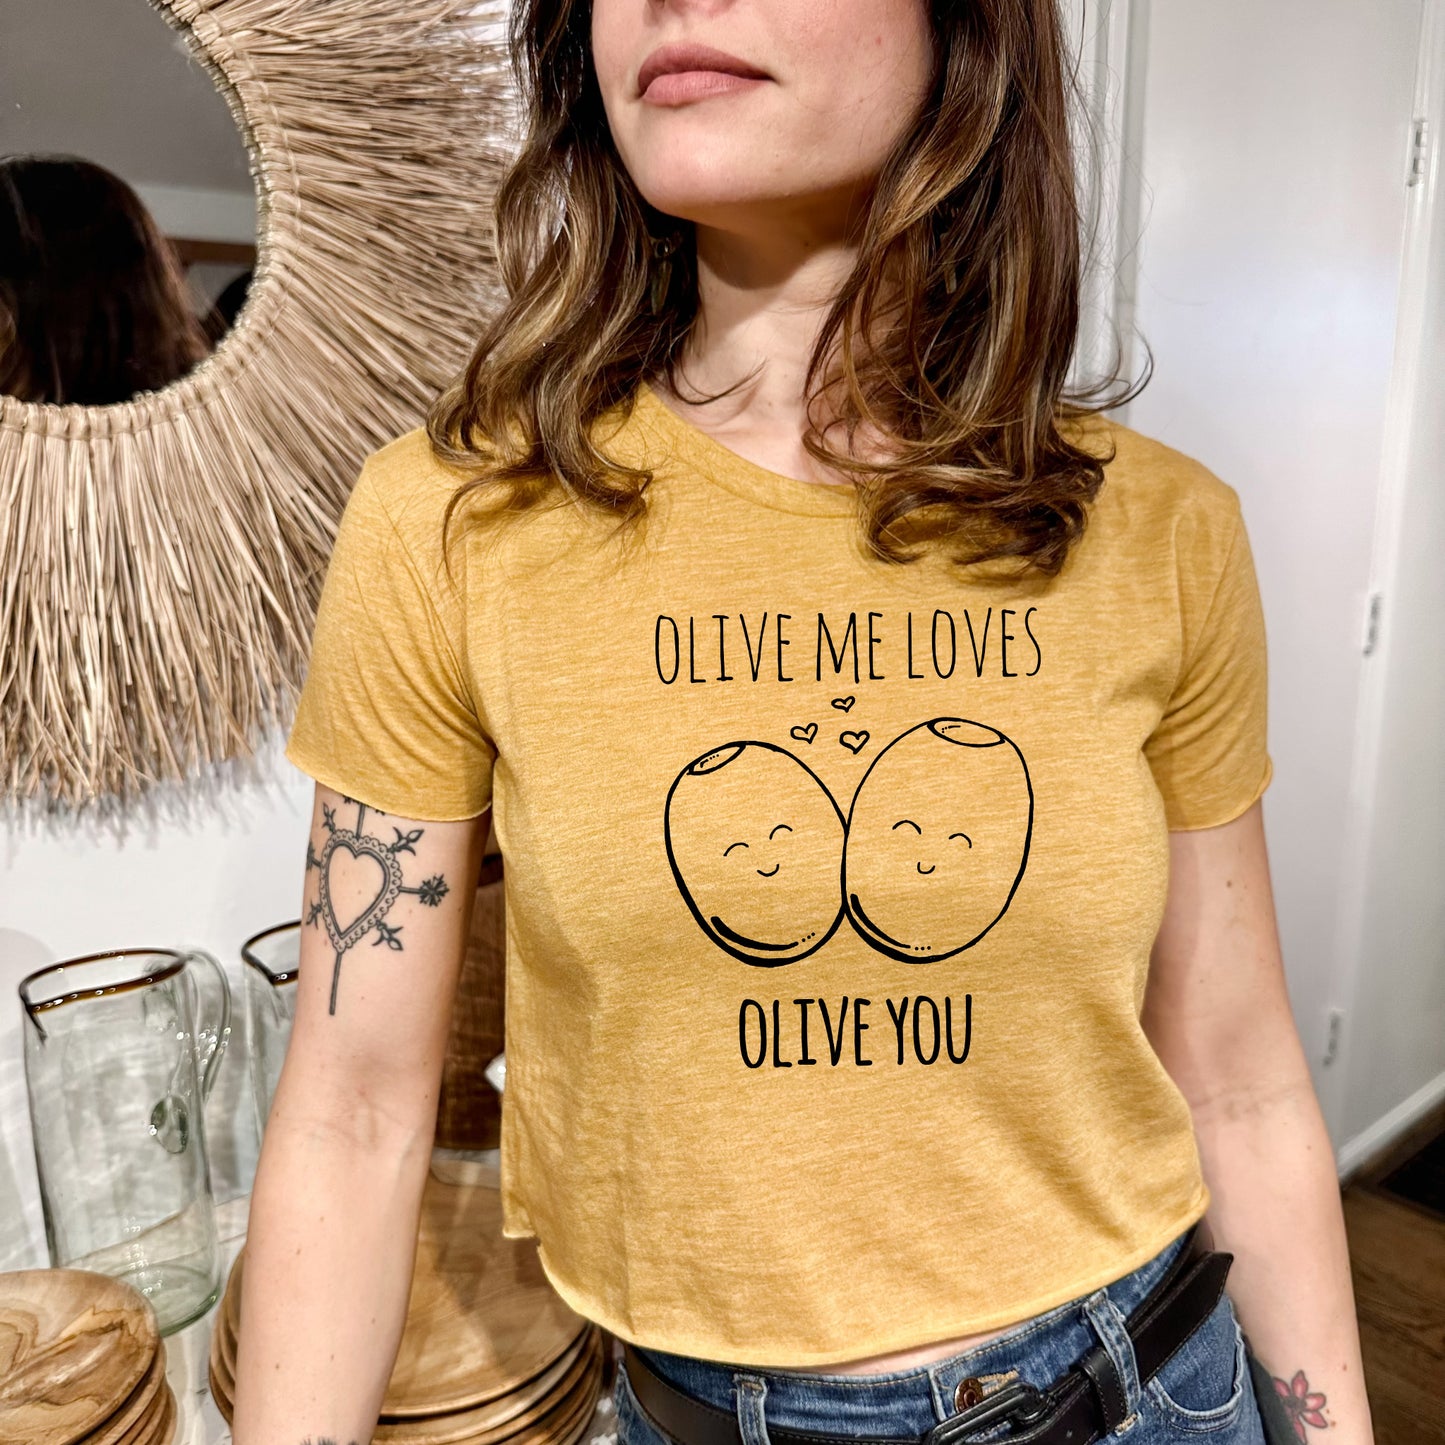 Olive Me Loves Olive You - Women's Crop Tee - Heather Gray or Gold